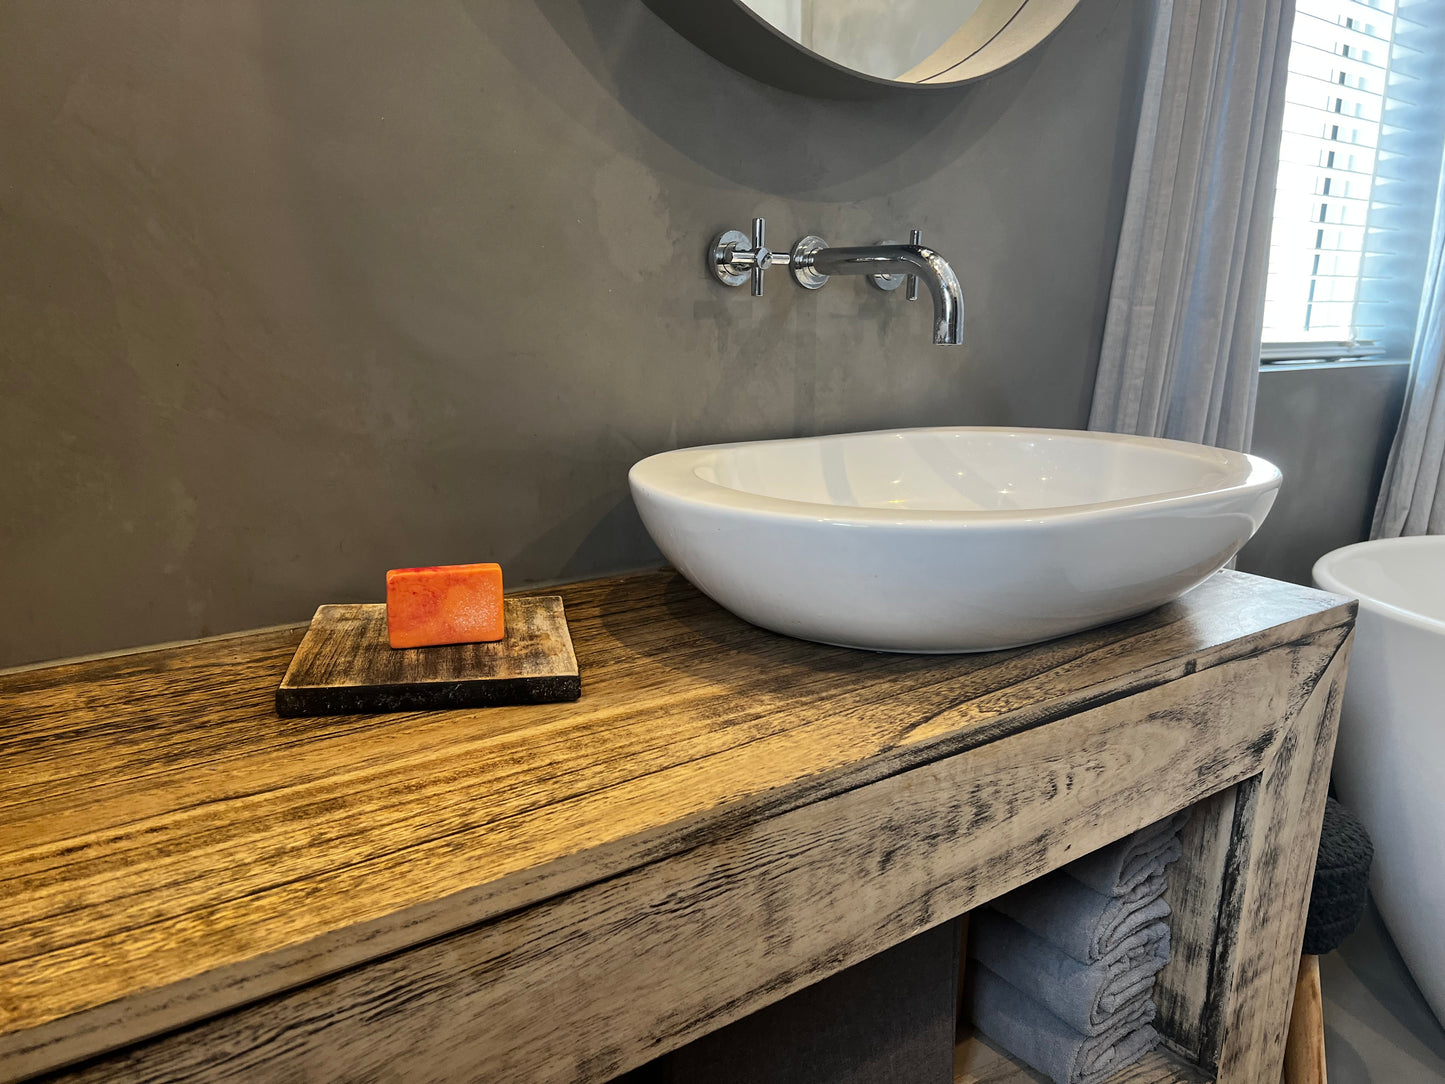 A red and orange rectangle bar soap, placed on a wooden sink counter. A white sink and silver taps are next to the soap